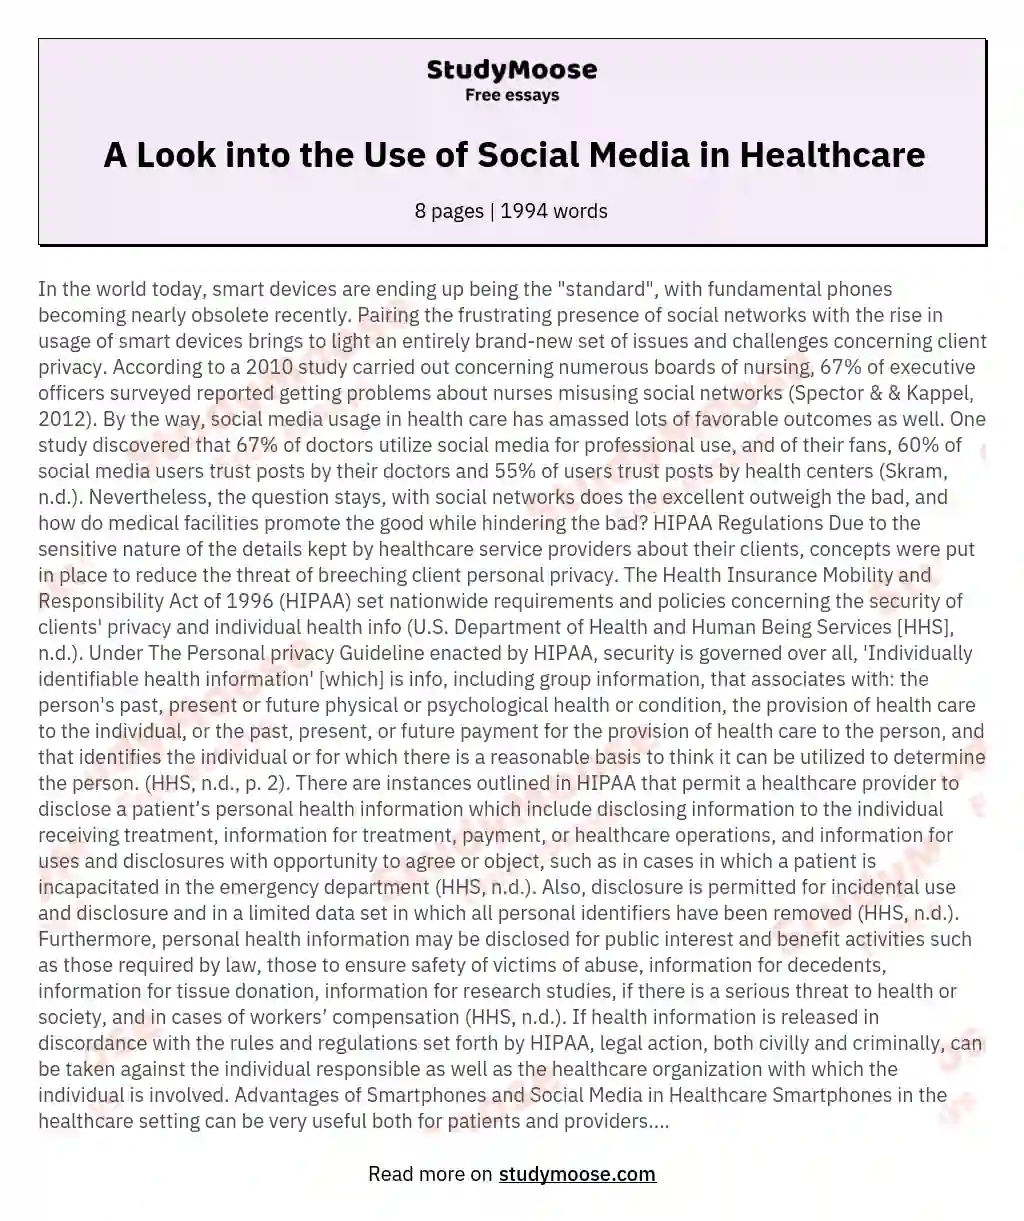 A Look into the Use of Social Media in Healthcare essay